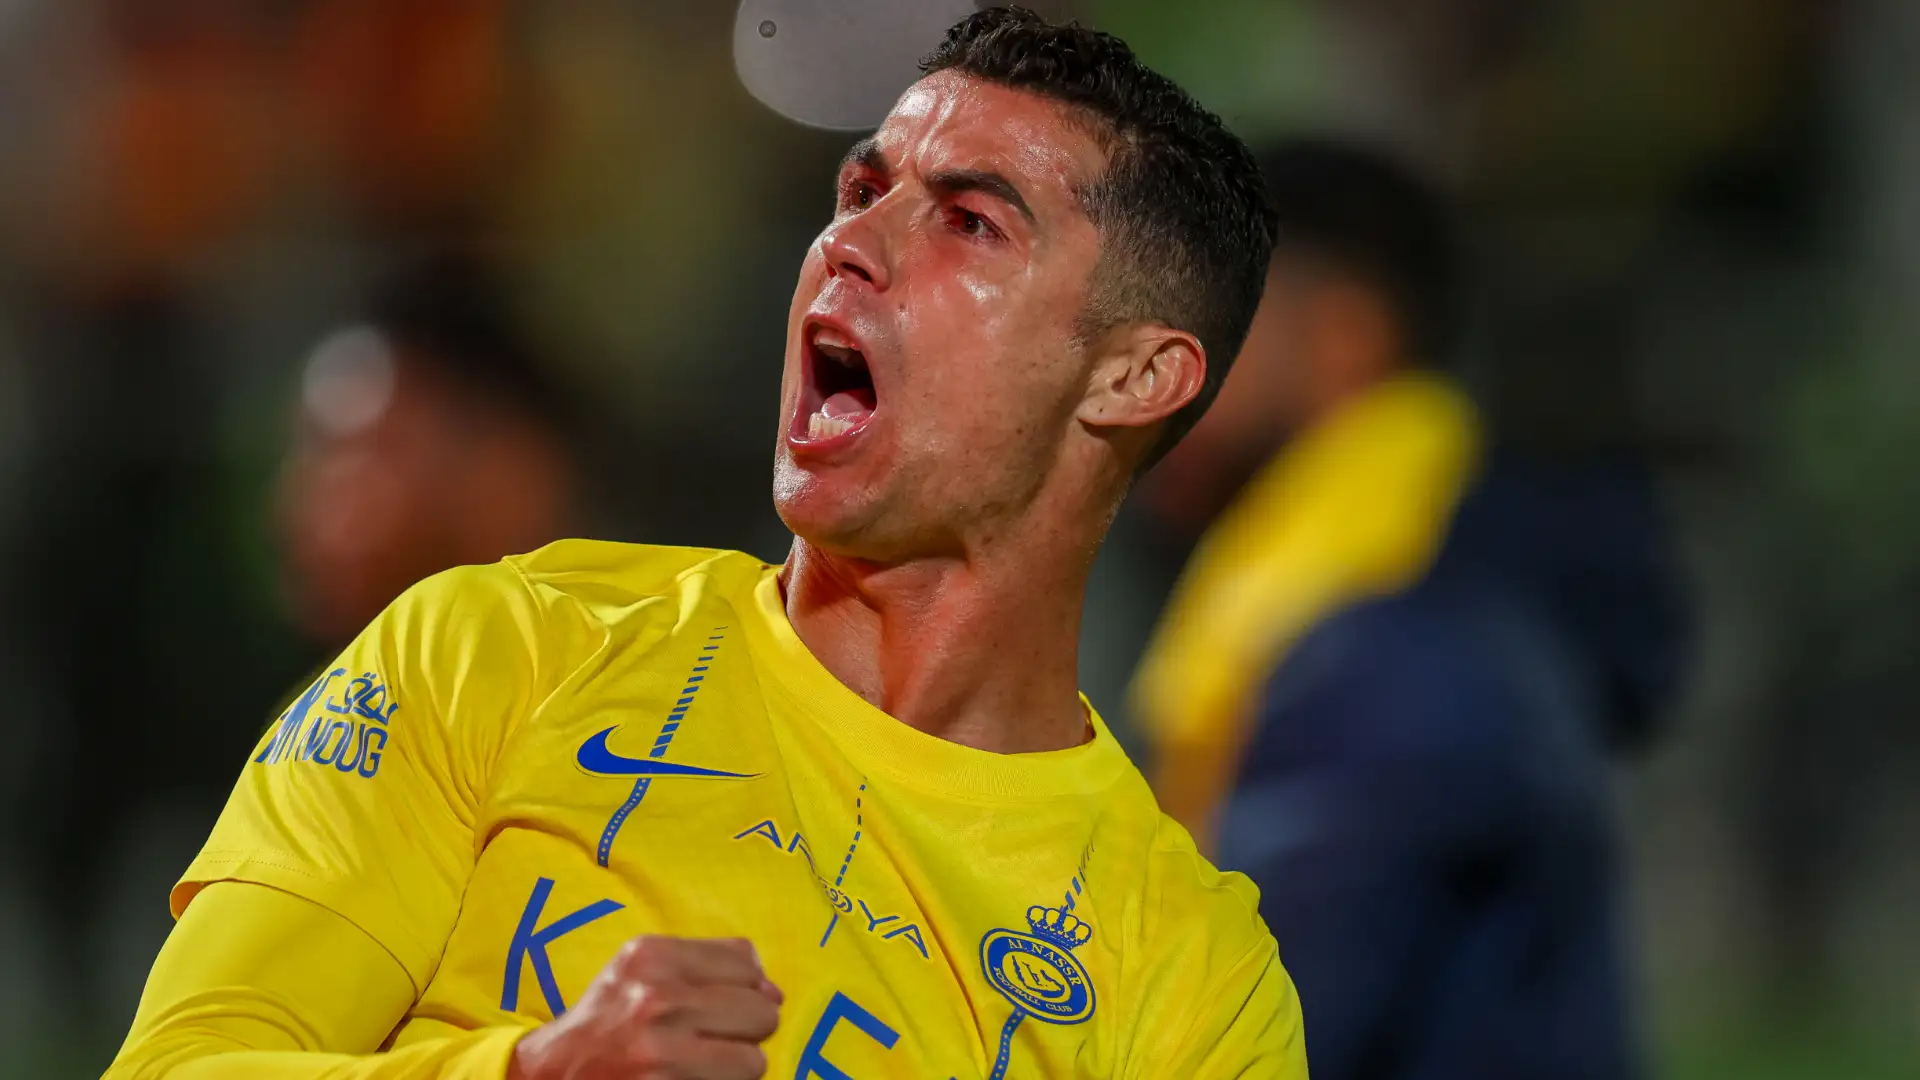 Contract extension for Cristiano Ronaldo at 40! Al-Nassr superstar ready to prolong 62-goal stint in Saudi Arabia